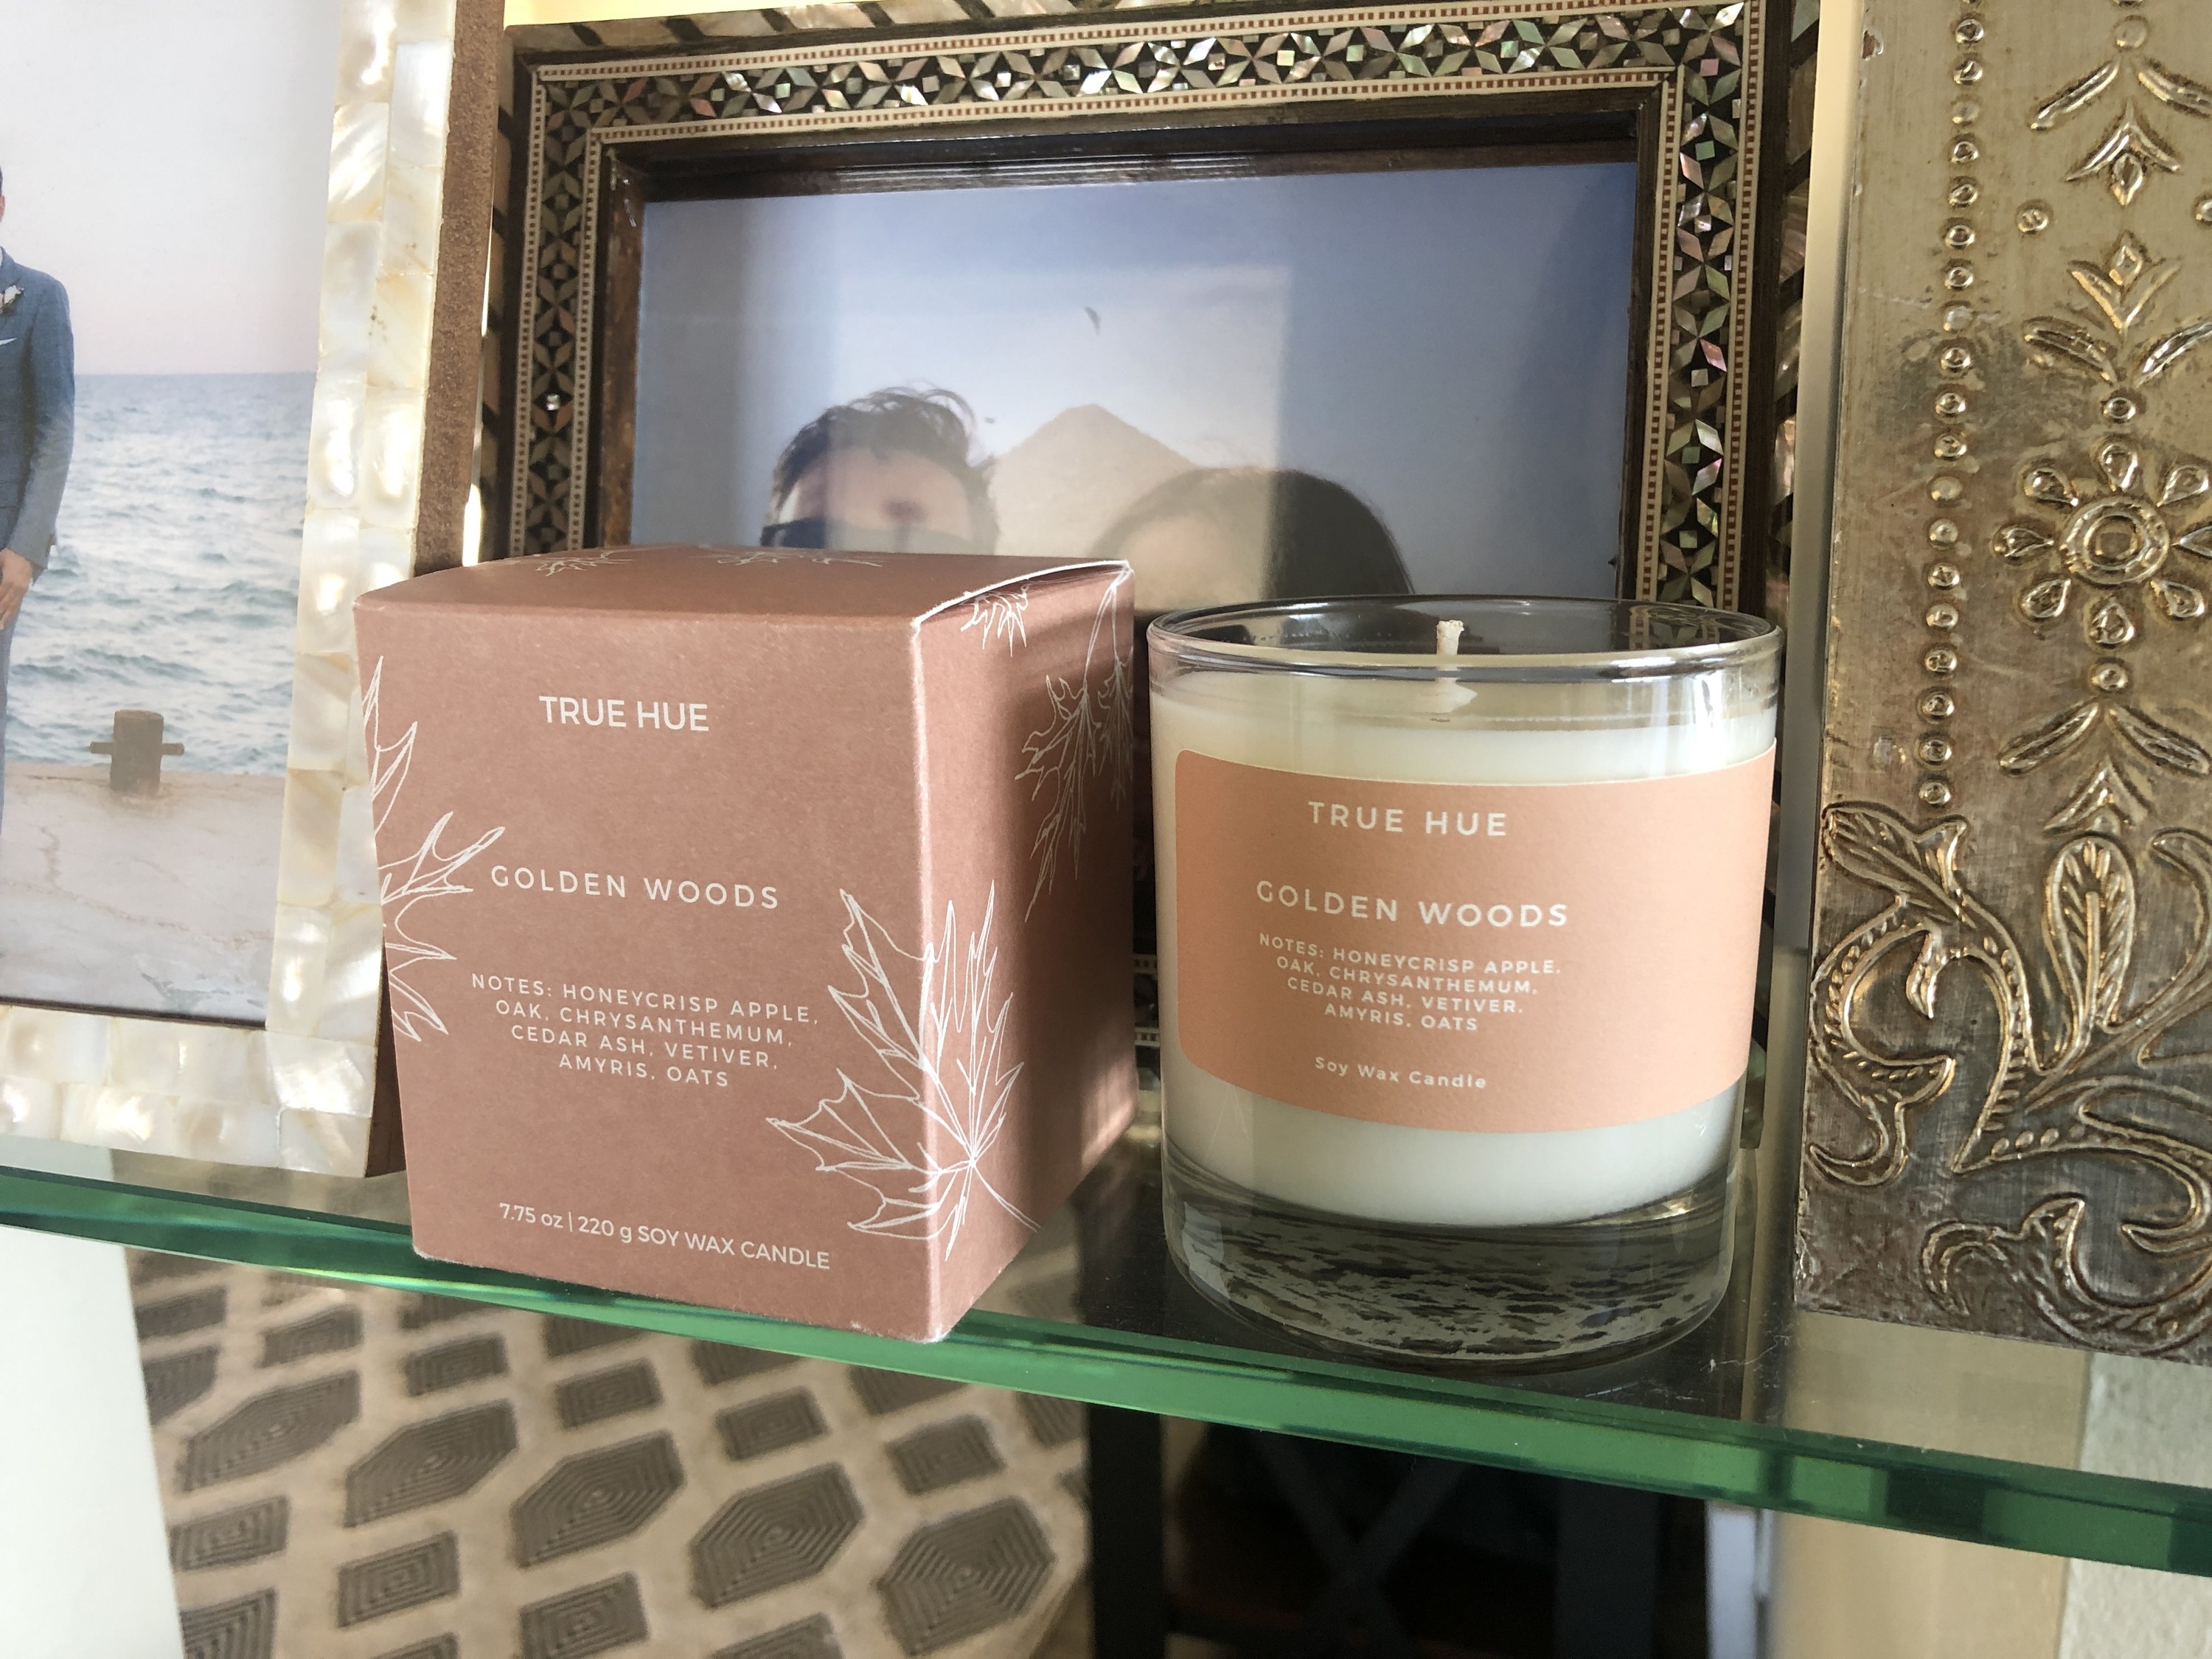 The candle and its packaging is shown on a glass shelf